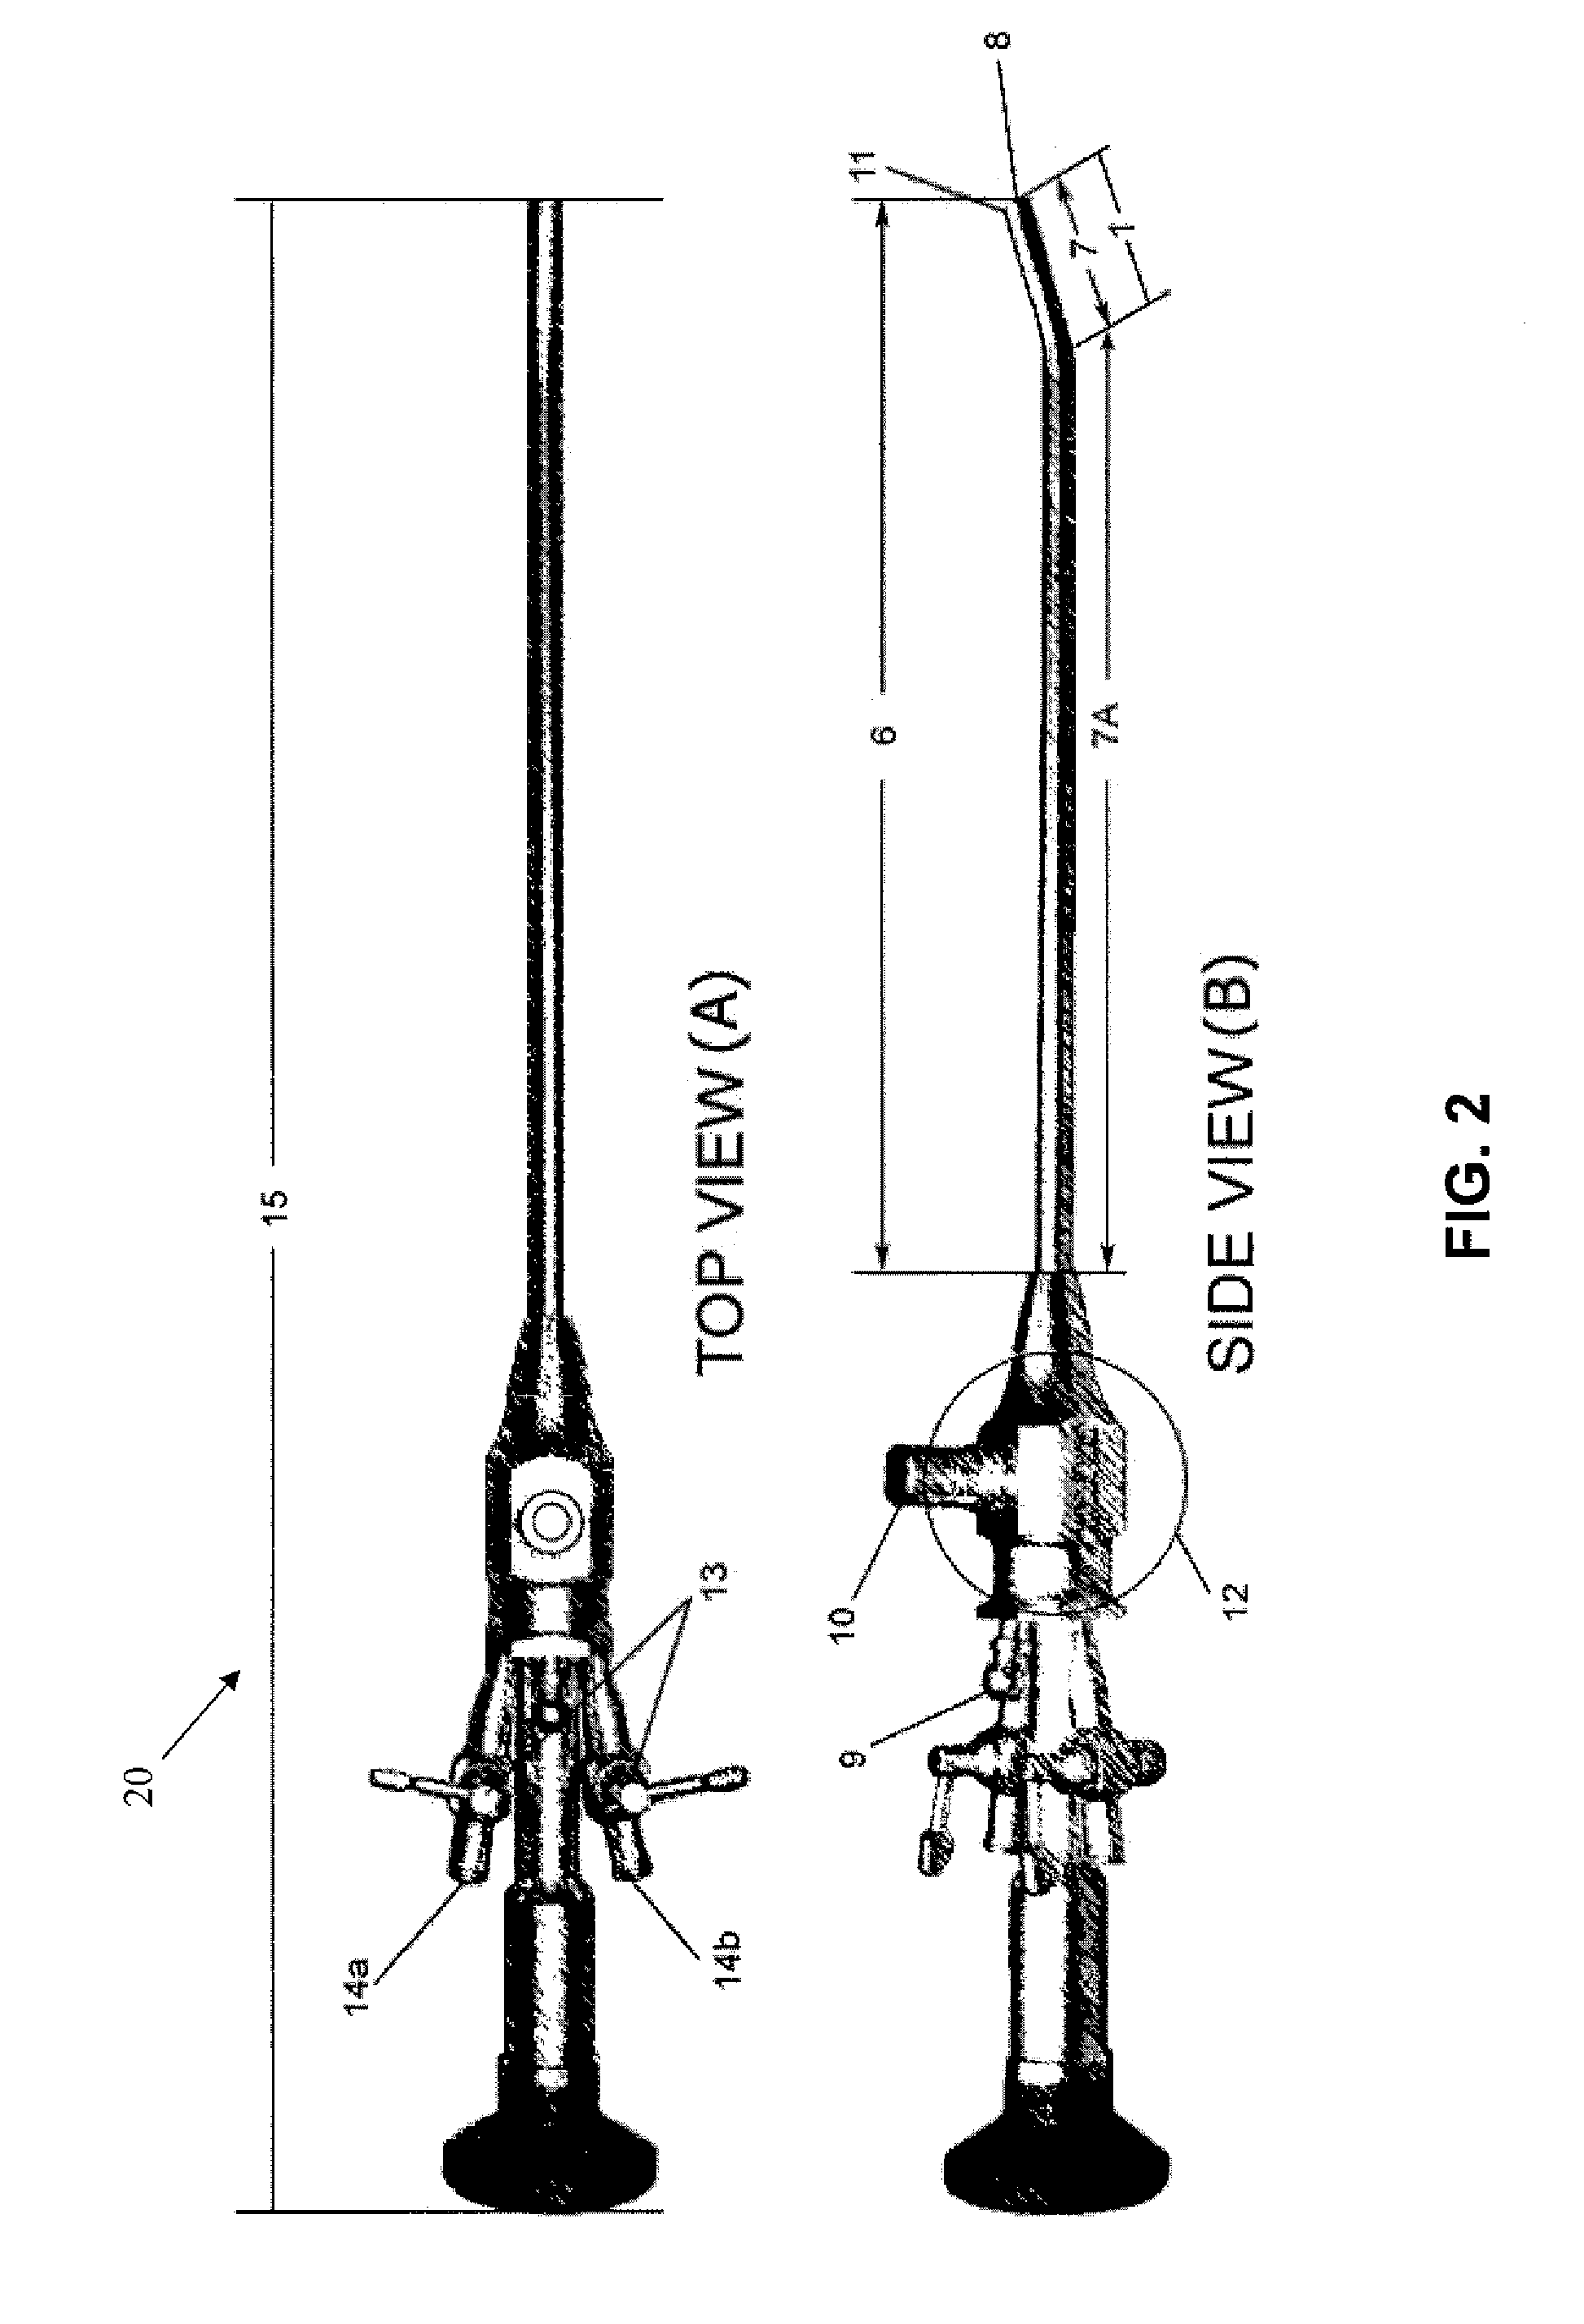 Hysteroscopes with curved tips